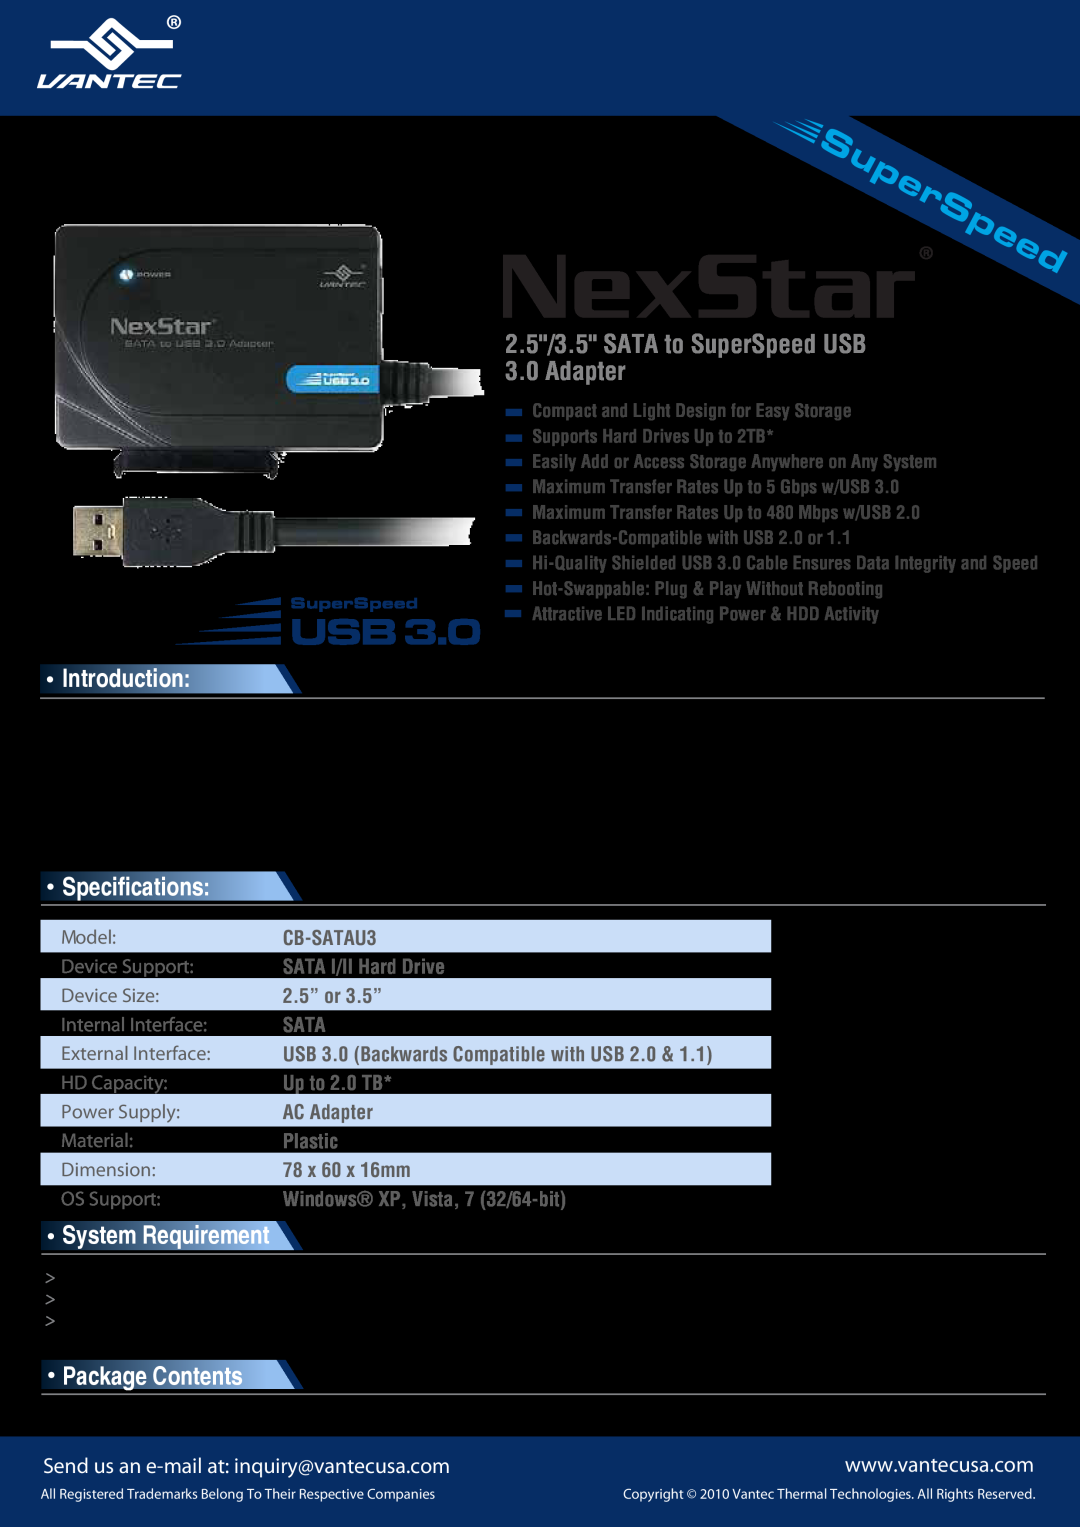 Nexstar CB-SATAU3 specifications 2.5/3.5 SATA to SuperSpeed USB 3.0 Adapter, Introduction, Specifications, 2.5” or 3.5” 